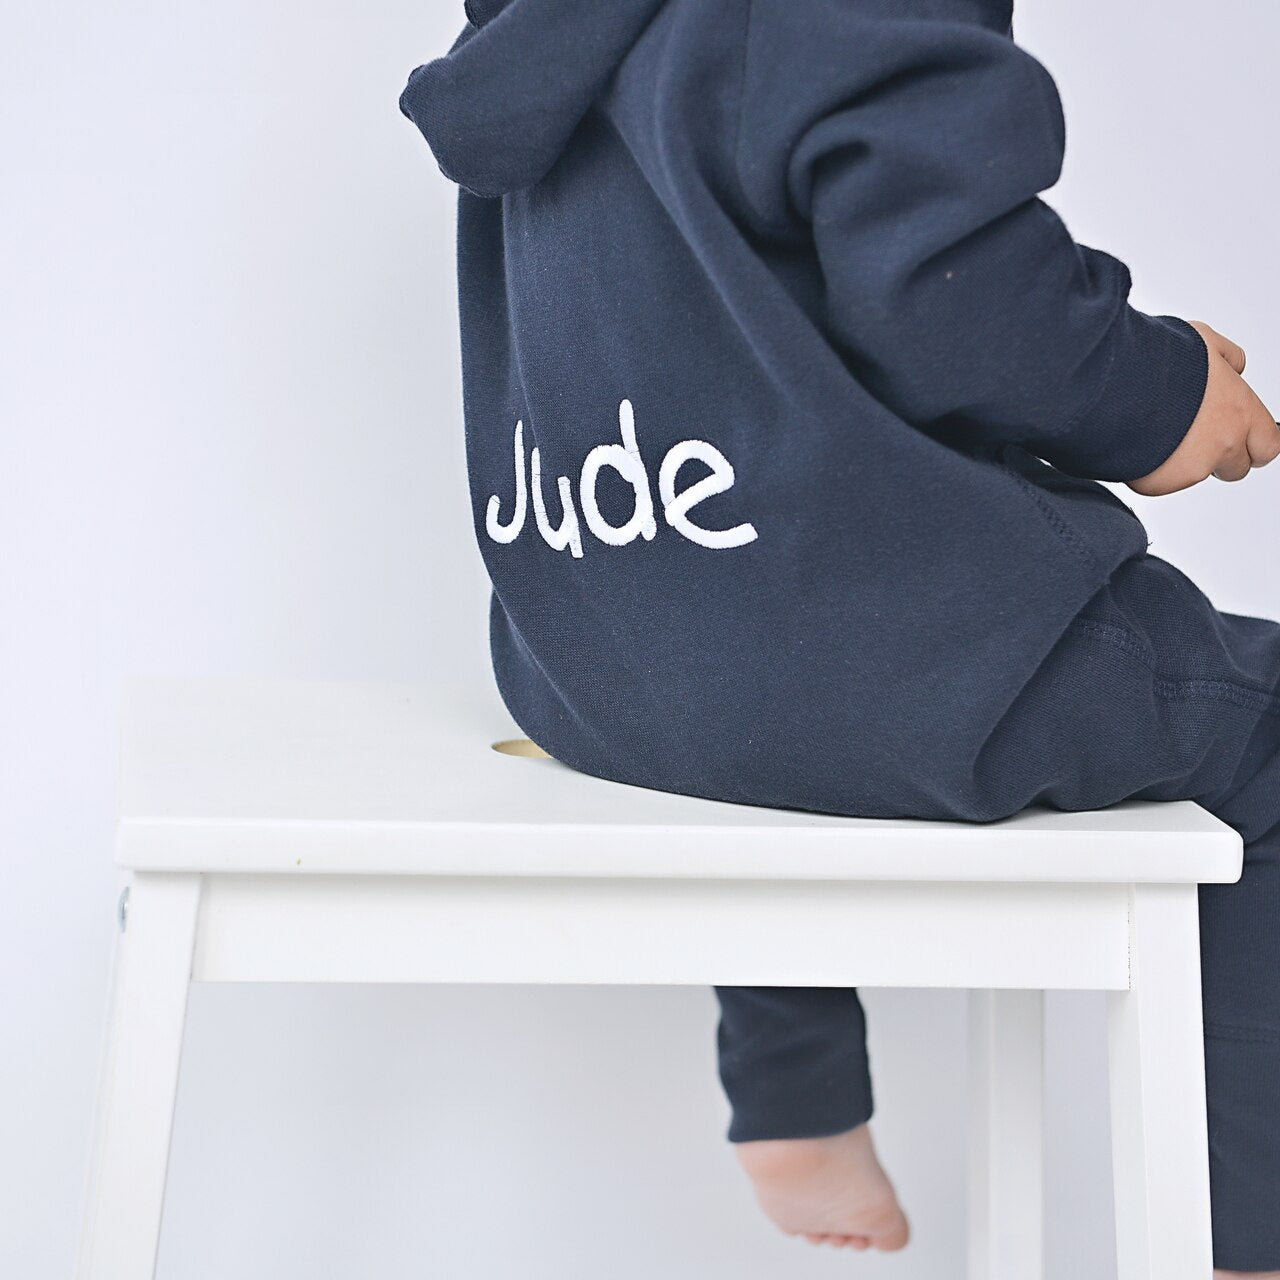 Kids Embroidered Personalised Onesie (Younger Sizes)